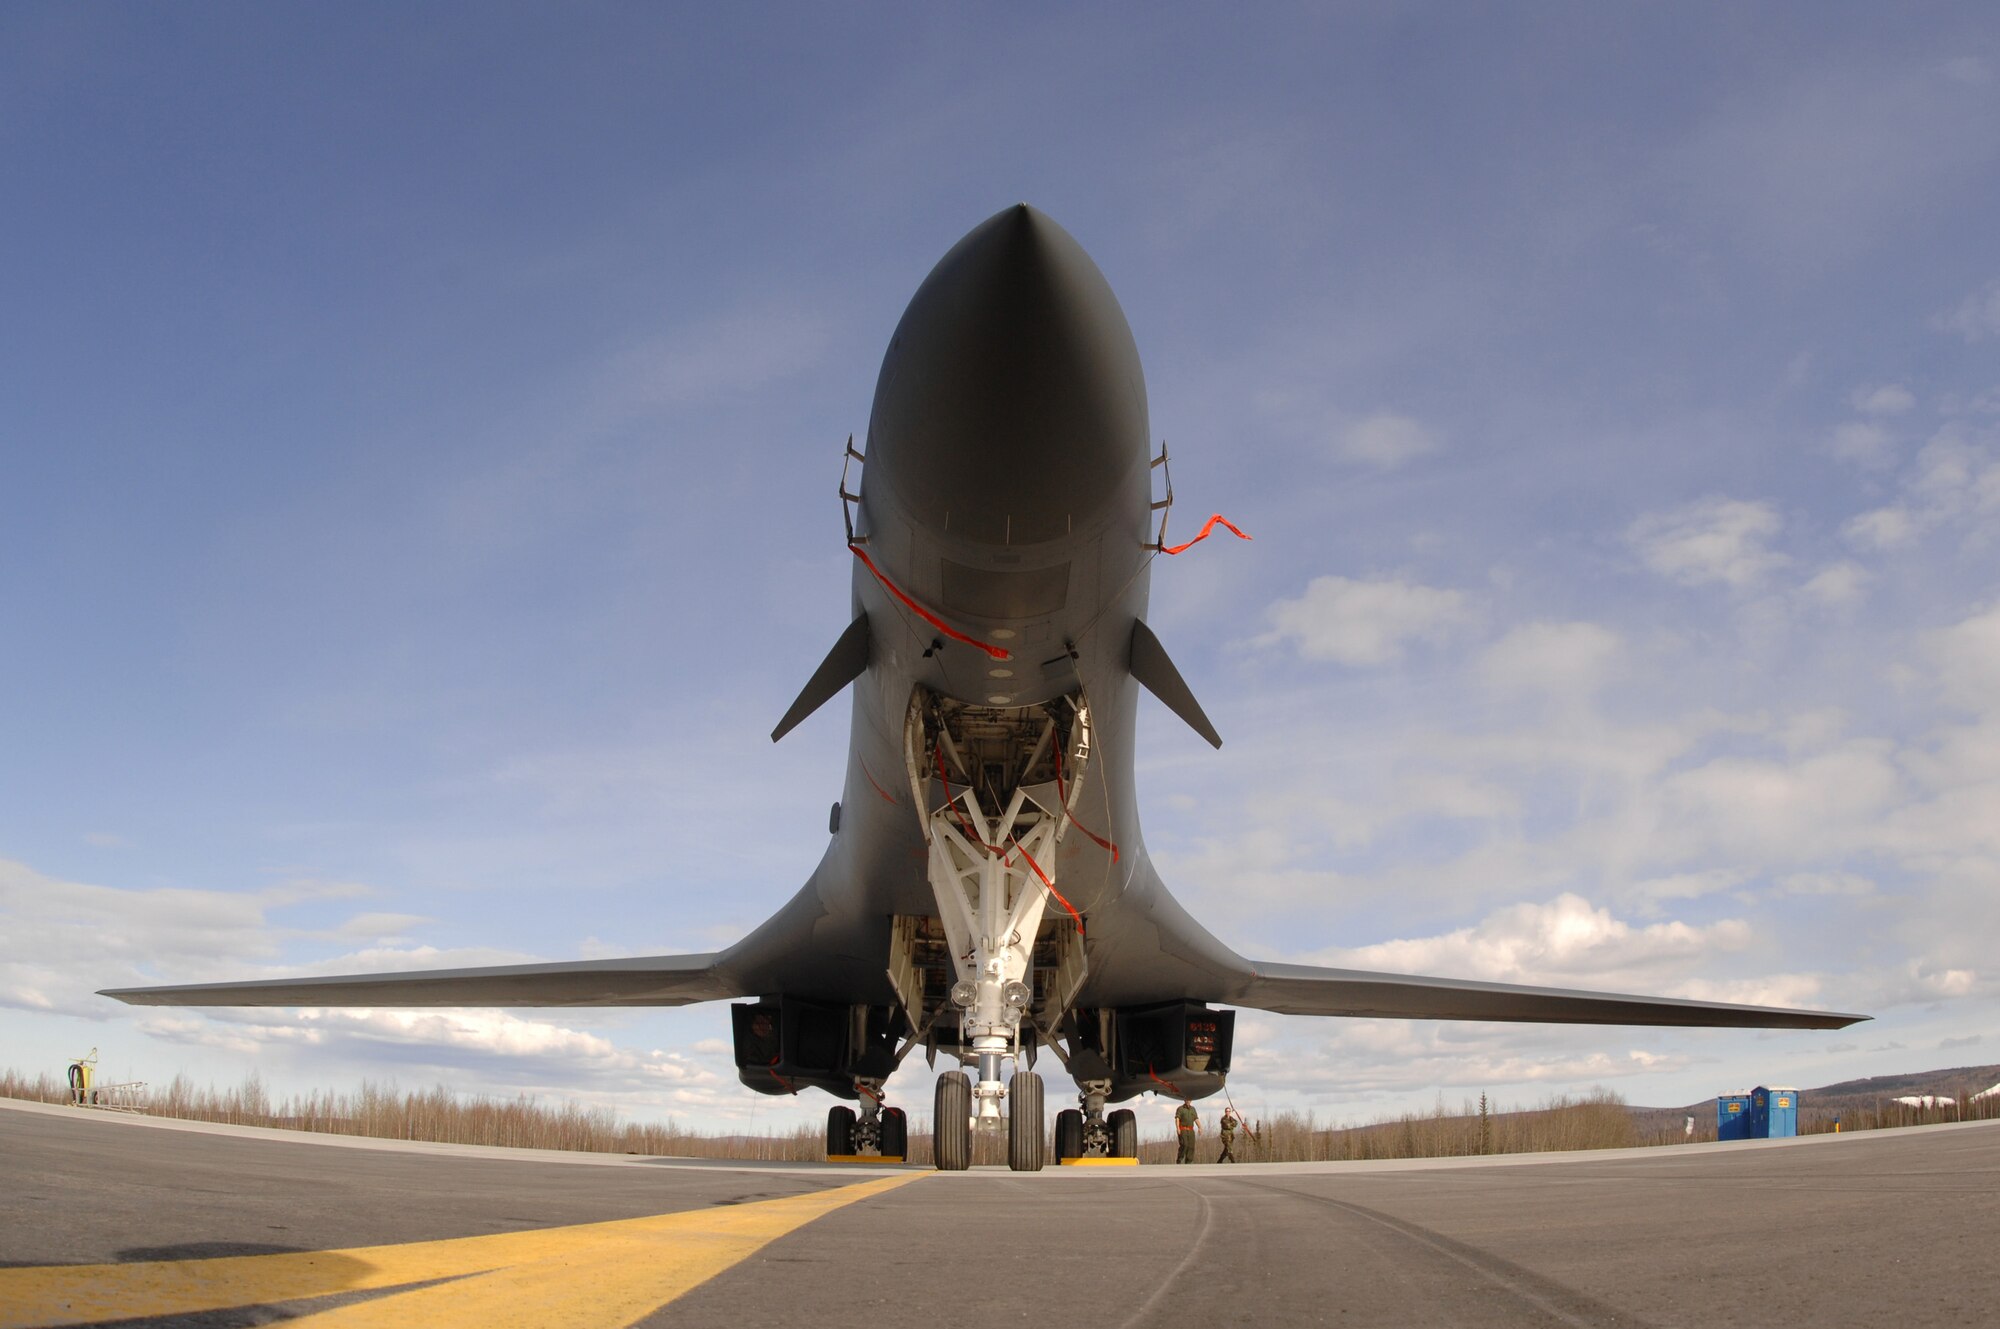 EIELSON AIR FORCE BASE, Alaska -- A B-1B Lancer from Ellsworth Air Force Base, South Dakota, sit on the flightline here on Apr 9 during Red Flag-Alaska 07-1. Red Flag-Alaska enables aviation units to sharpen their combat skills by flying ten simulated combat sorties in a realistic threat environment. Additionally, the training allows them to exchange tactics, techniques, and procedures and improve interoperability.
(U.S. Air Force Photo by Staff Sgt Joshua Strang)